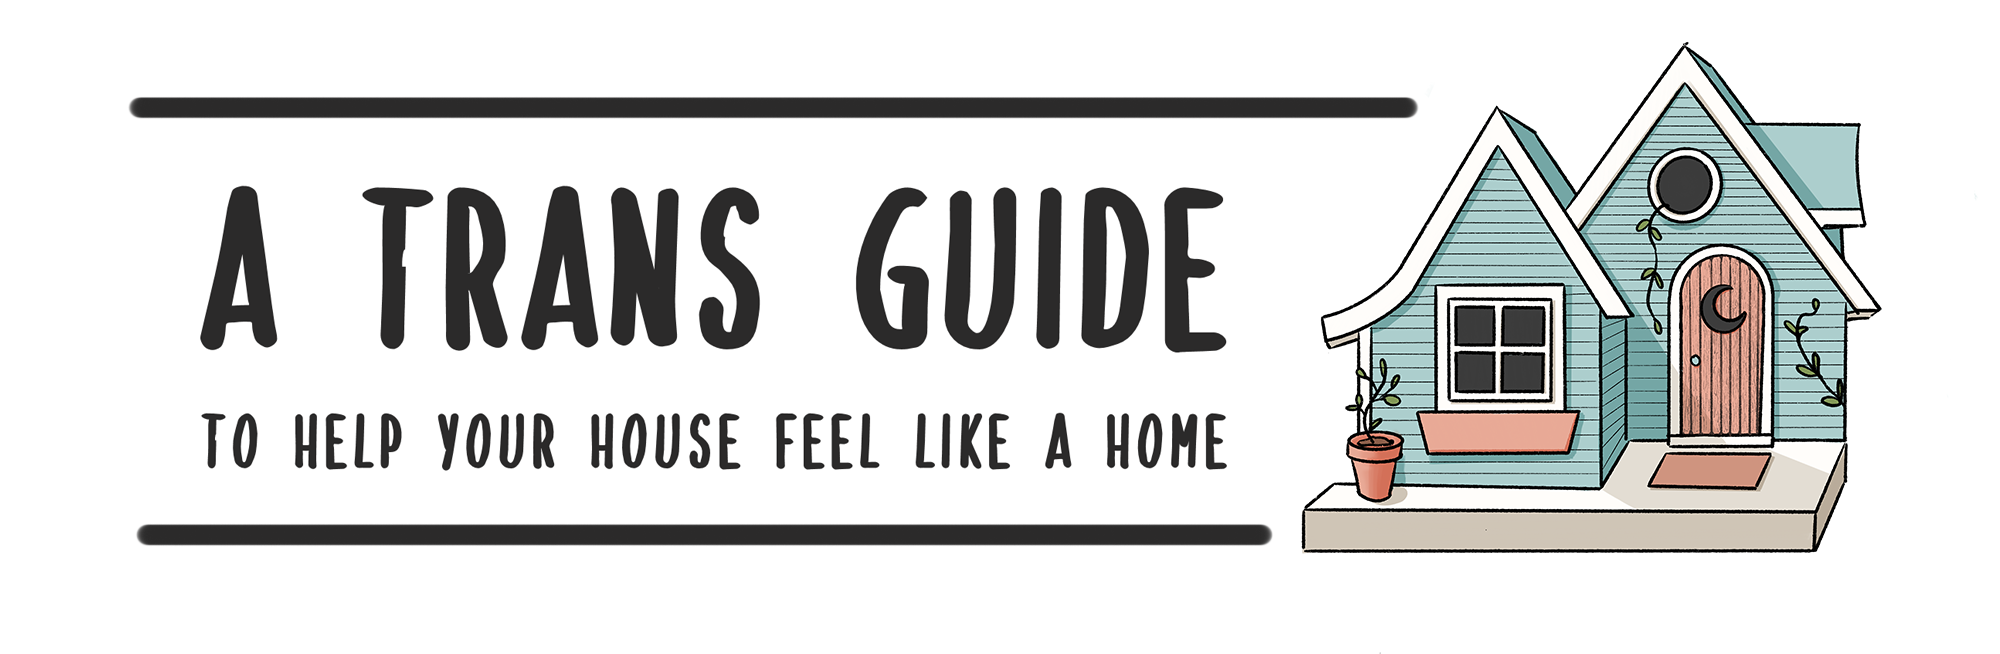 A Trans Guide to make your house feel like a home